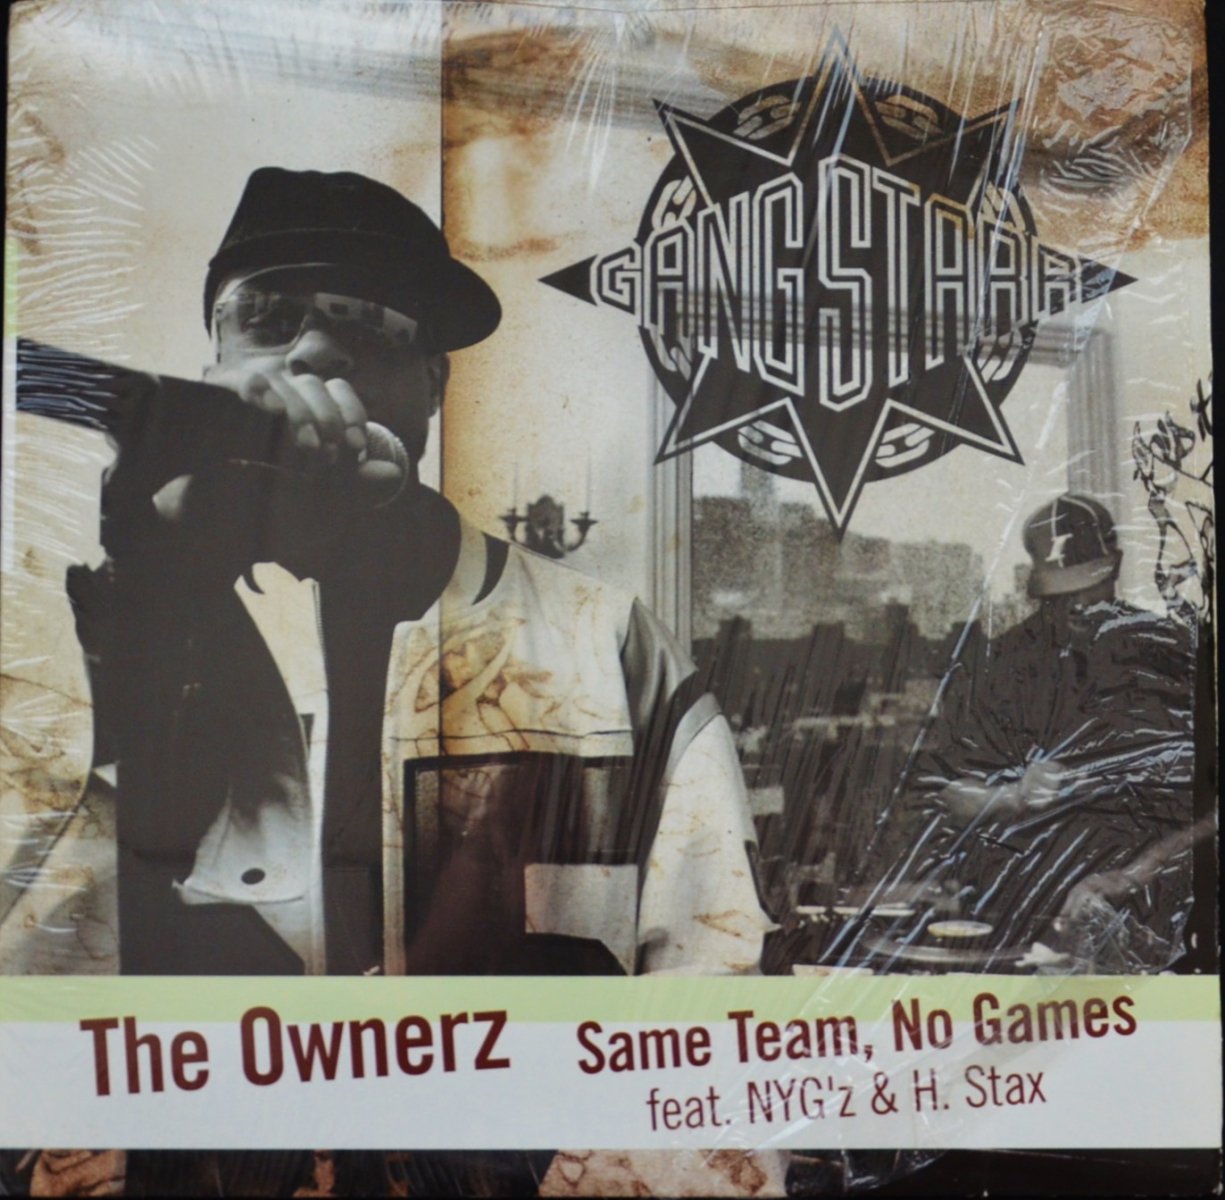 GANG STARR ‎/ THE OWNERZ / SAME TEAM, NO GAMES (FEAT.NYG'Z) (12